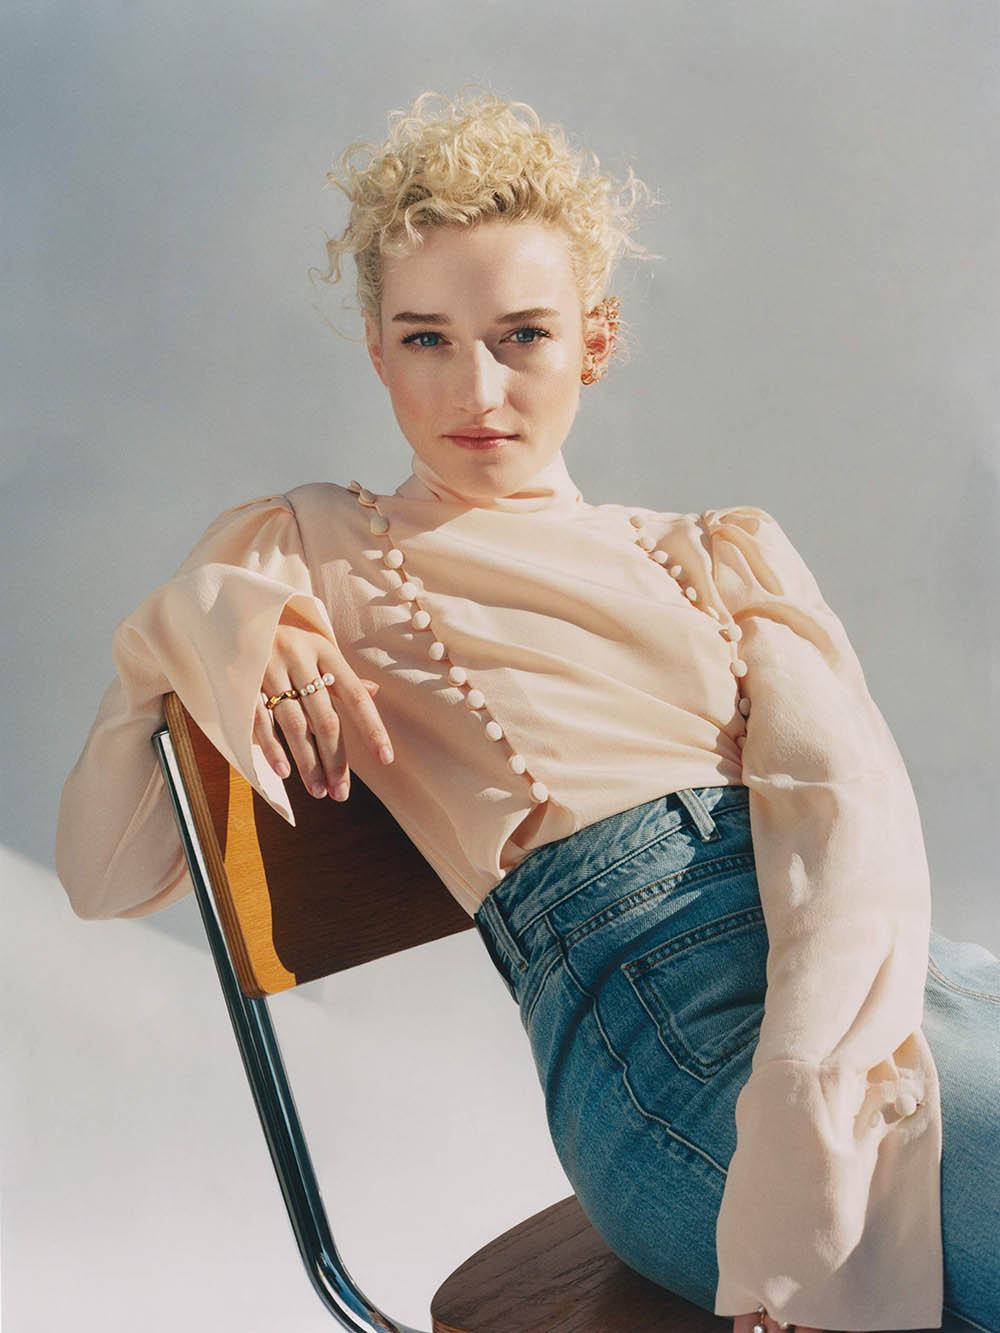 Julia Garner covers Porter Magazine March 30th, 2020 by Terence Connors ...